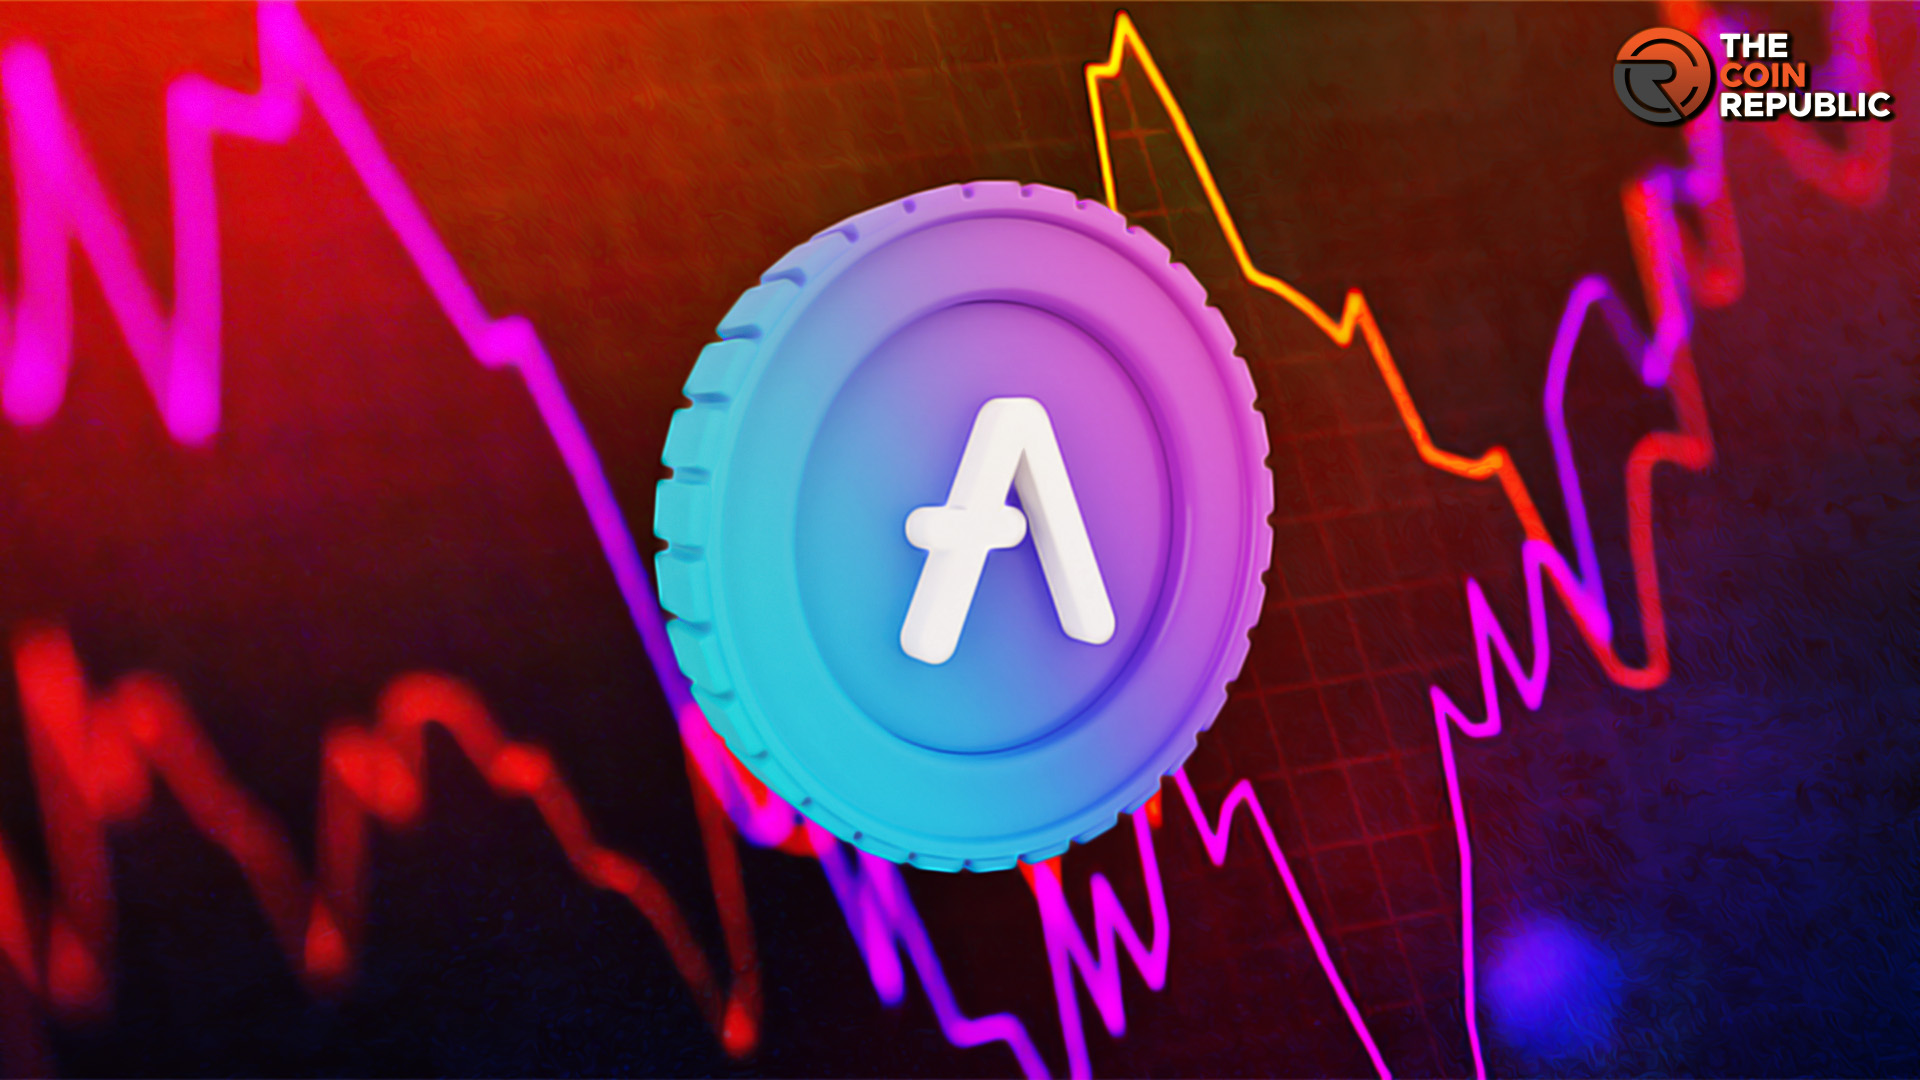 Aave Price Prediction: Does AAVE Has Potential to Conquer $100?